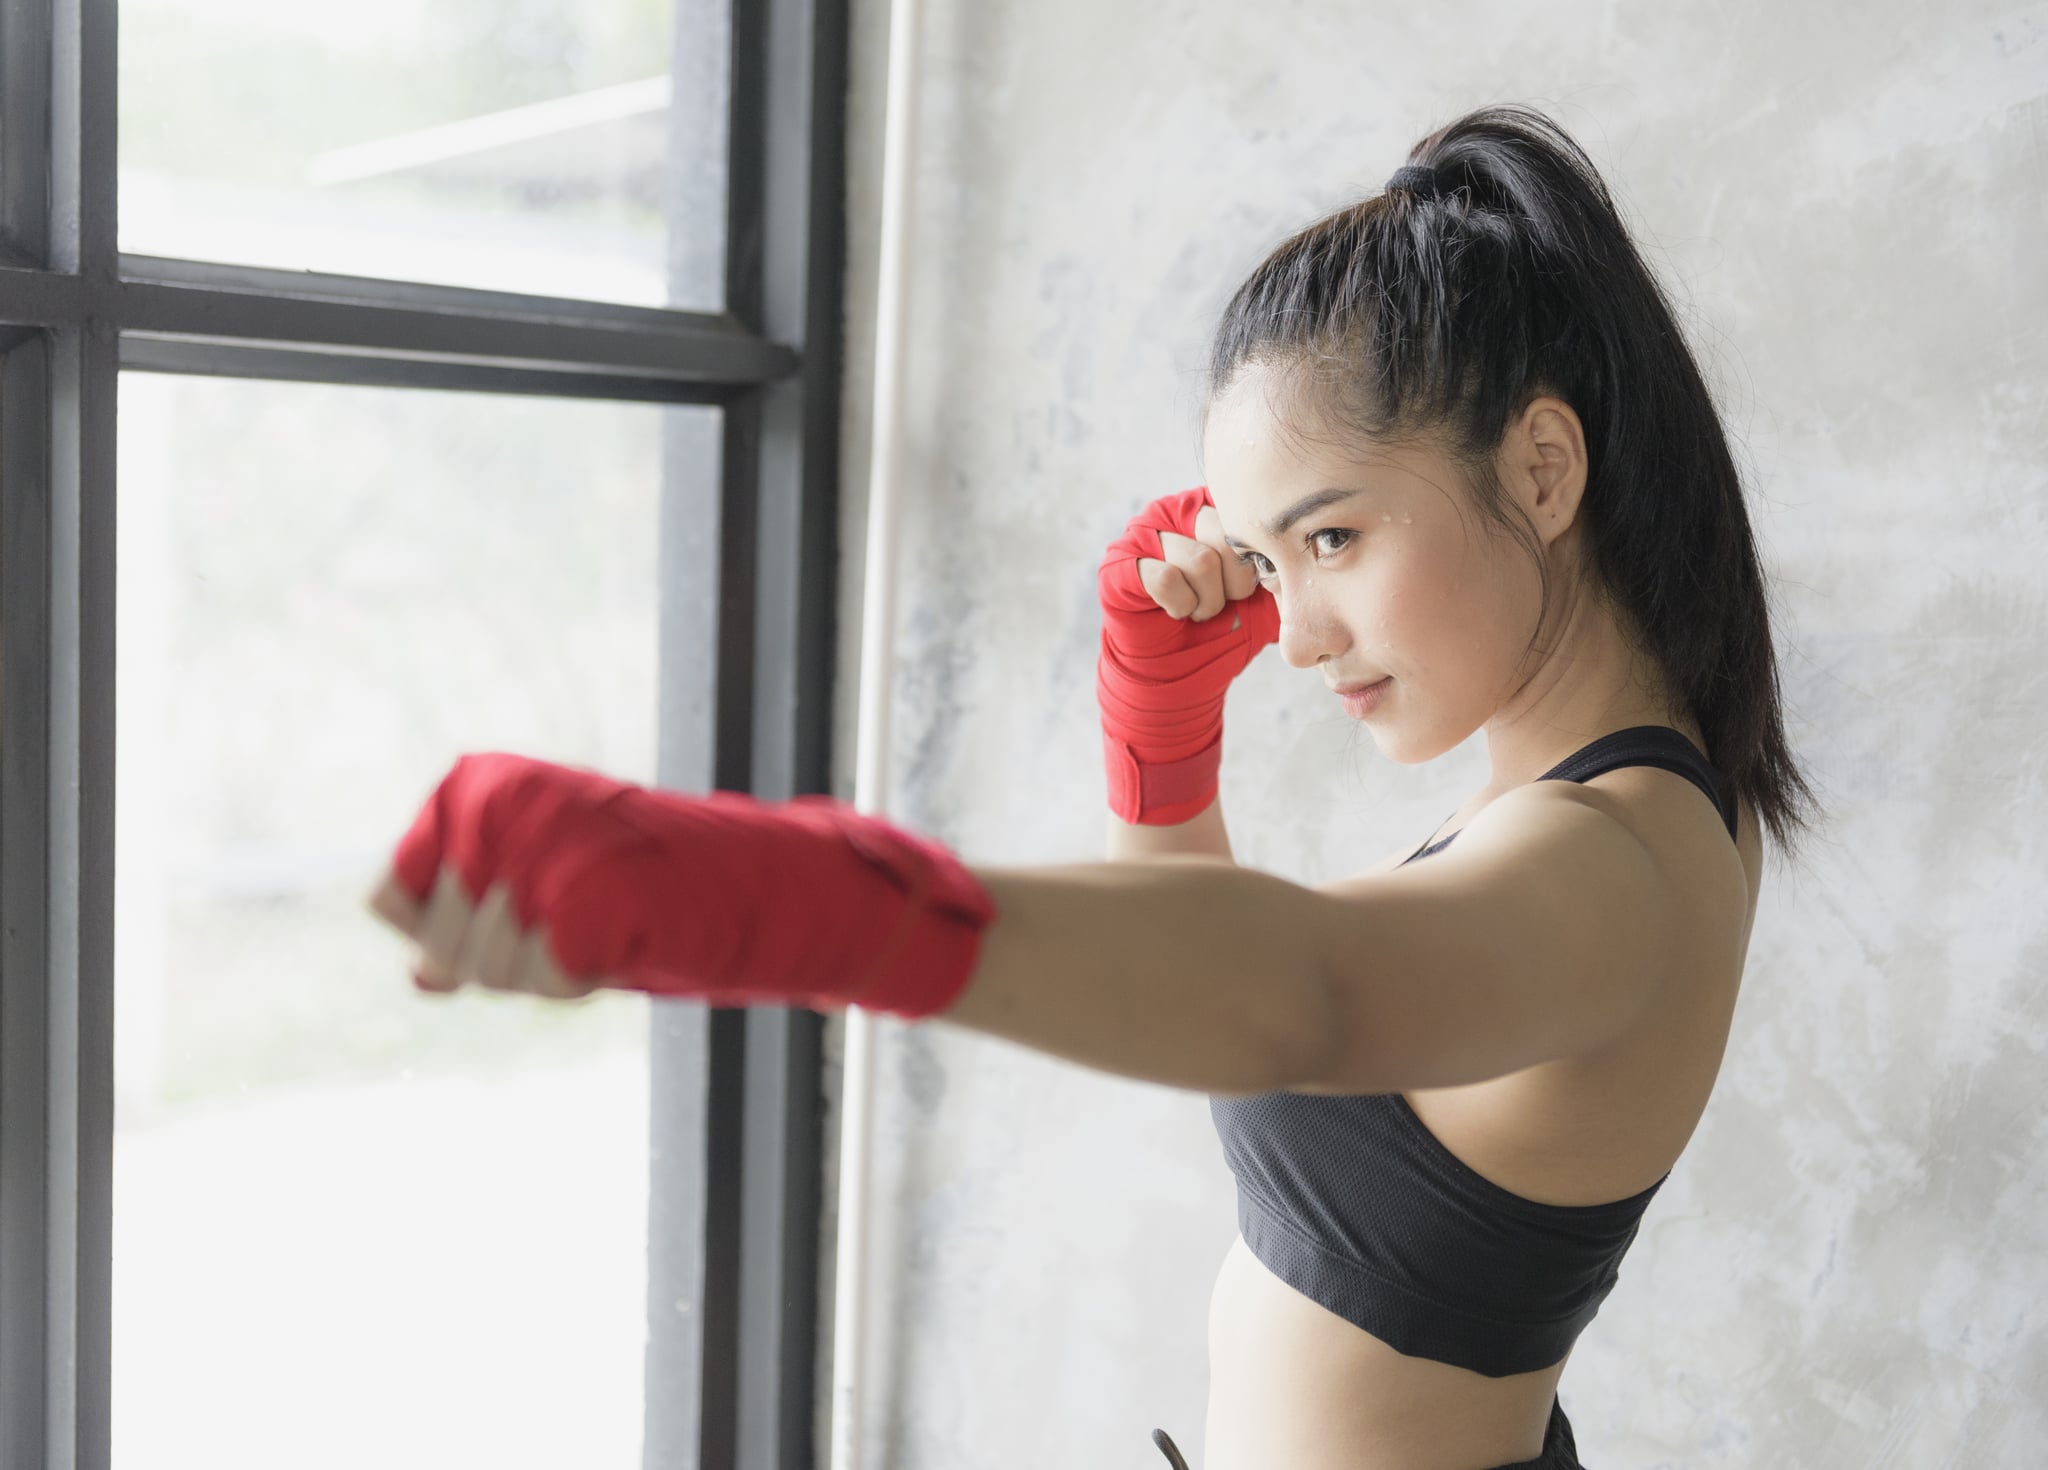 Equipment or Not, You Can Still Work on Your Kickboxing Technique at Home